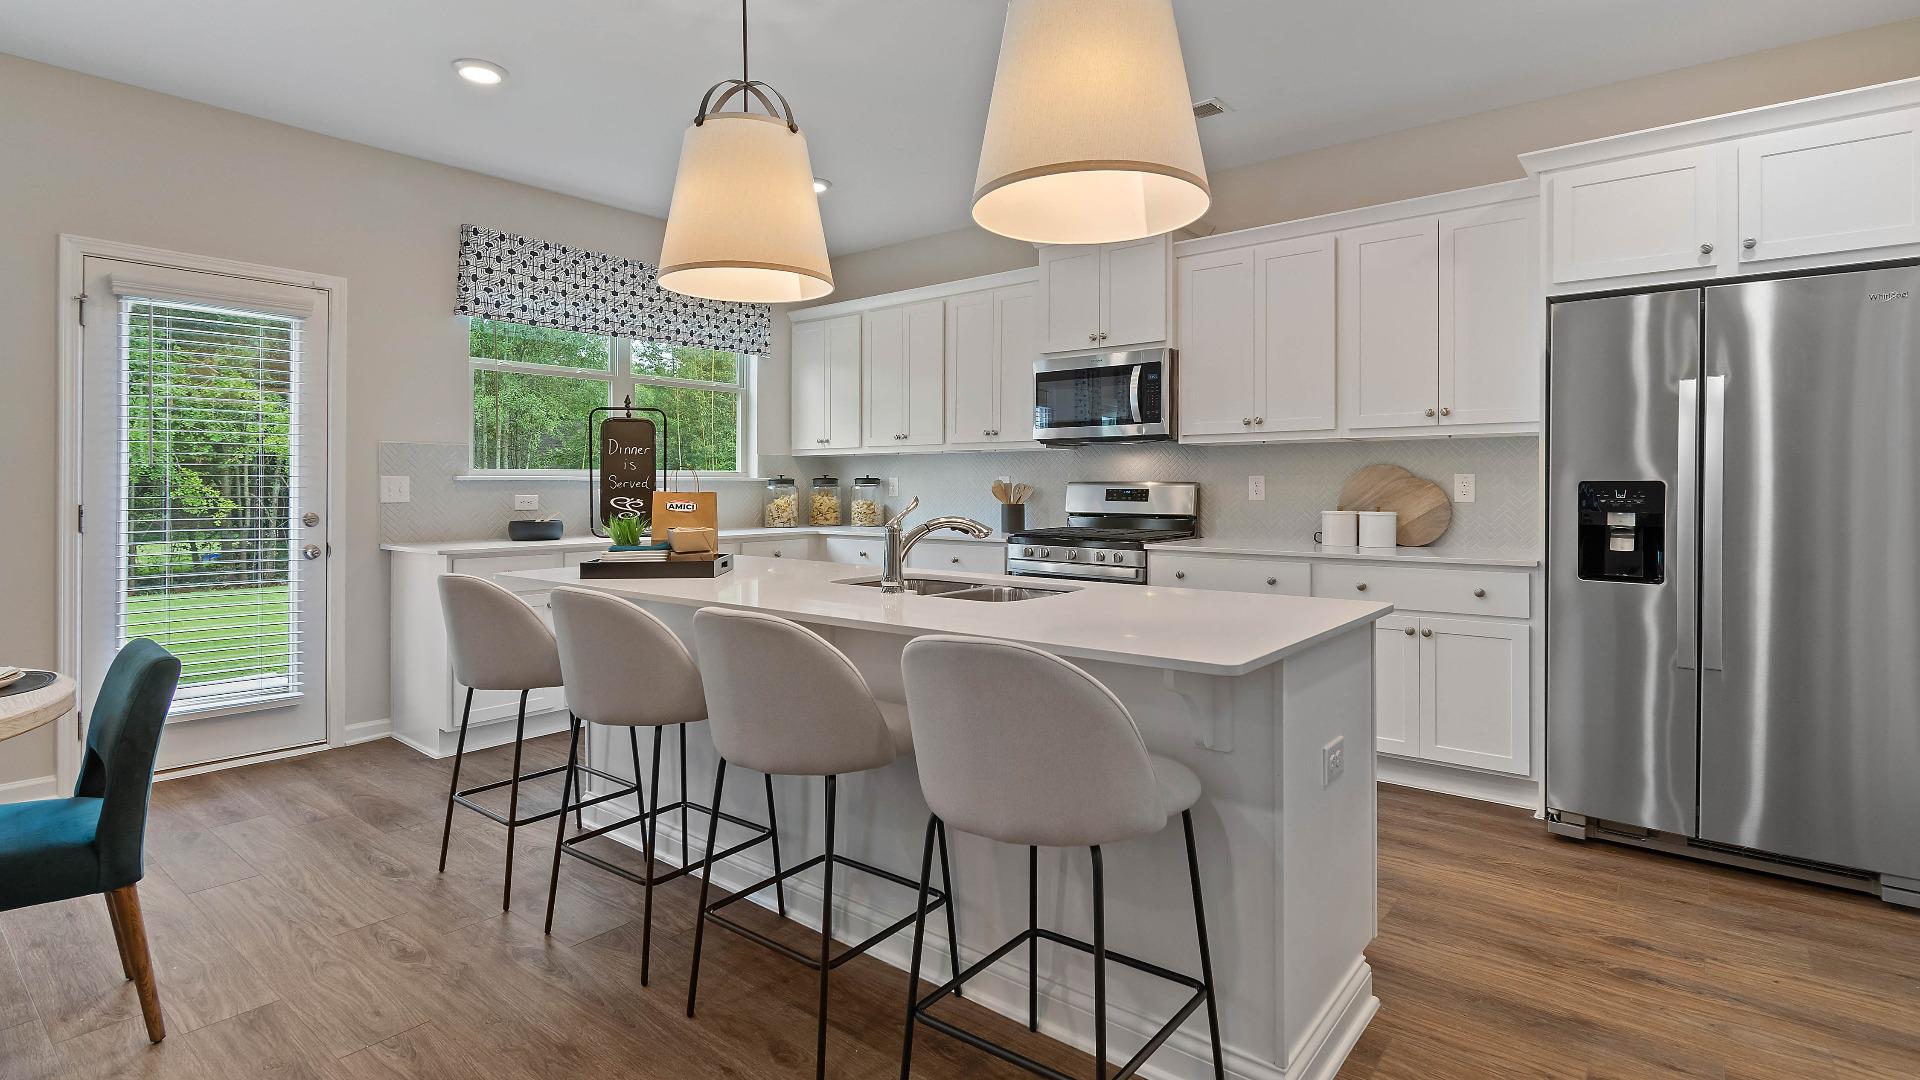 Single family home kitchen with white cabinets and island in DRB Homes Eleanora Community